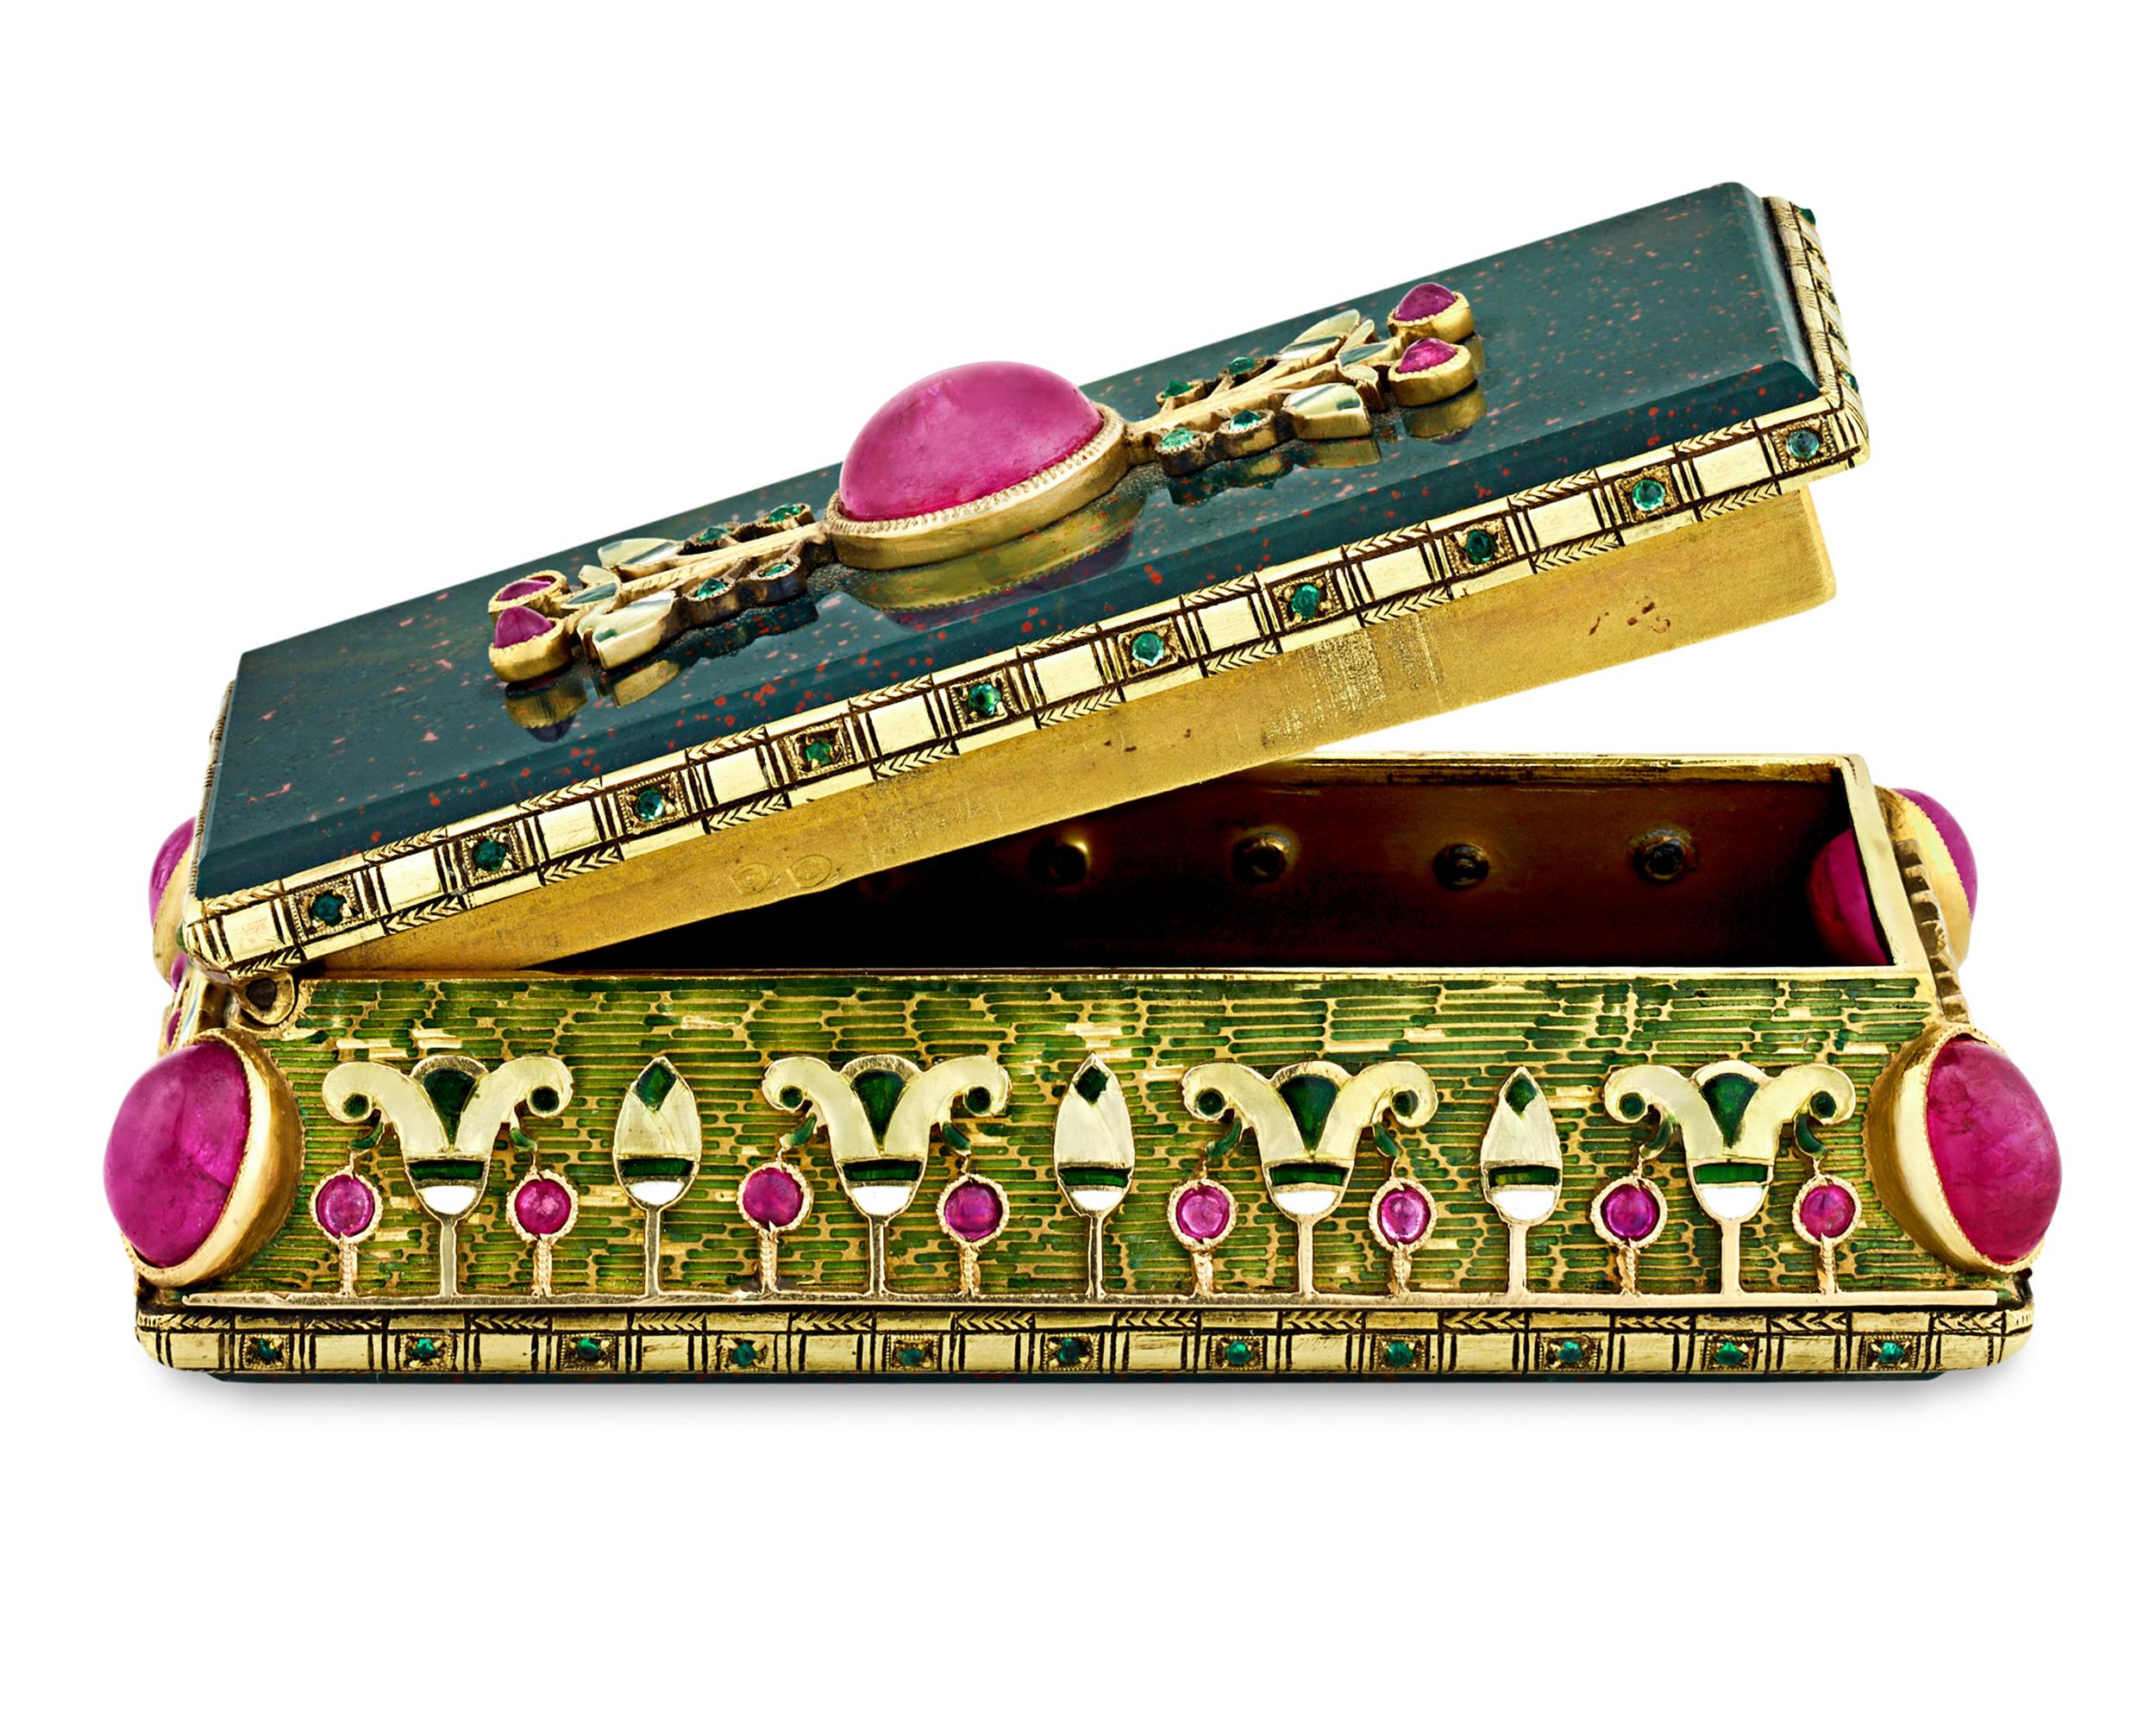 This exquisite French circa 1880 jasper and gold box is accented with Burma rubies, emeralds and enamel. Crafted in the Egyptian Revival style, objets d’art such as these were commissioned by wealthy aristocracy and were certainly seen as status